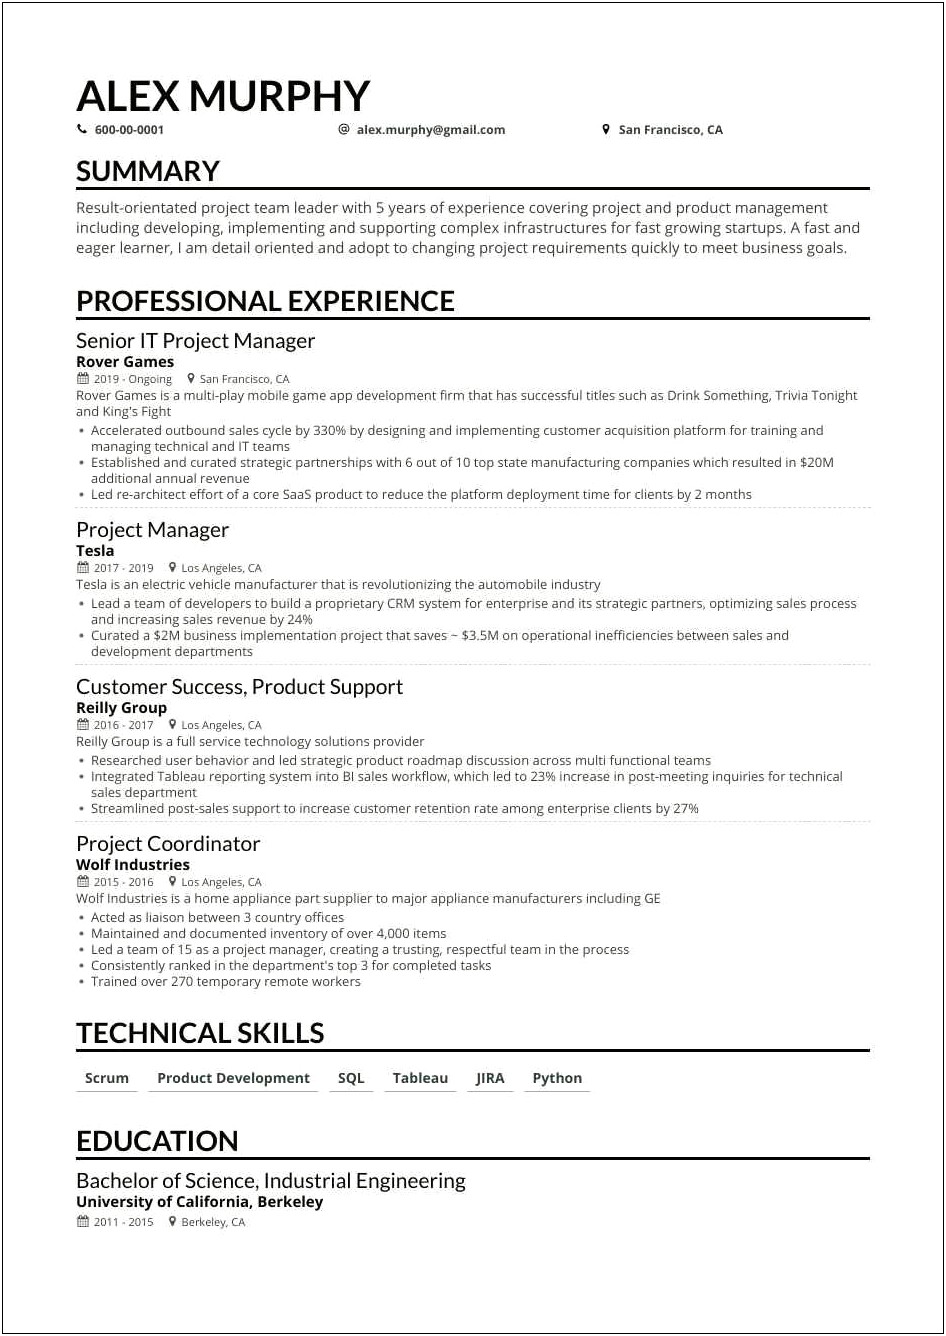 Resume Format For Project Manager In Interior Design